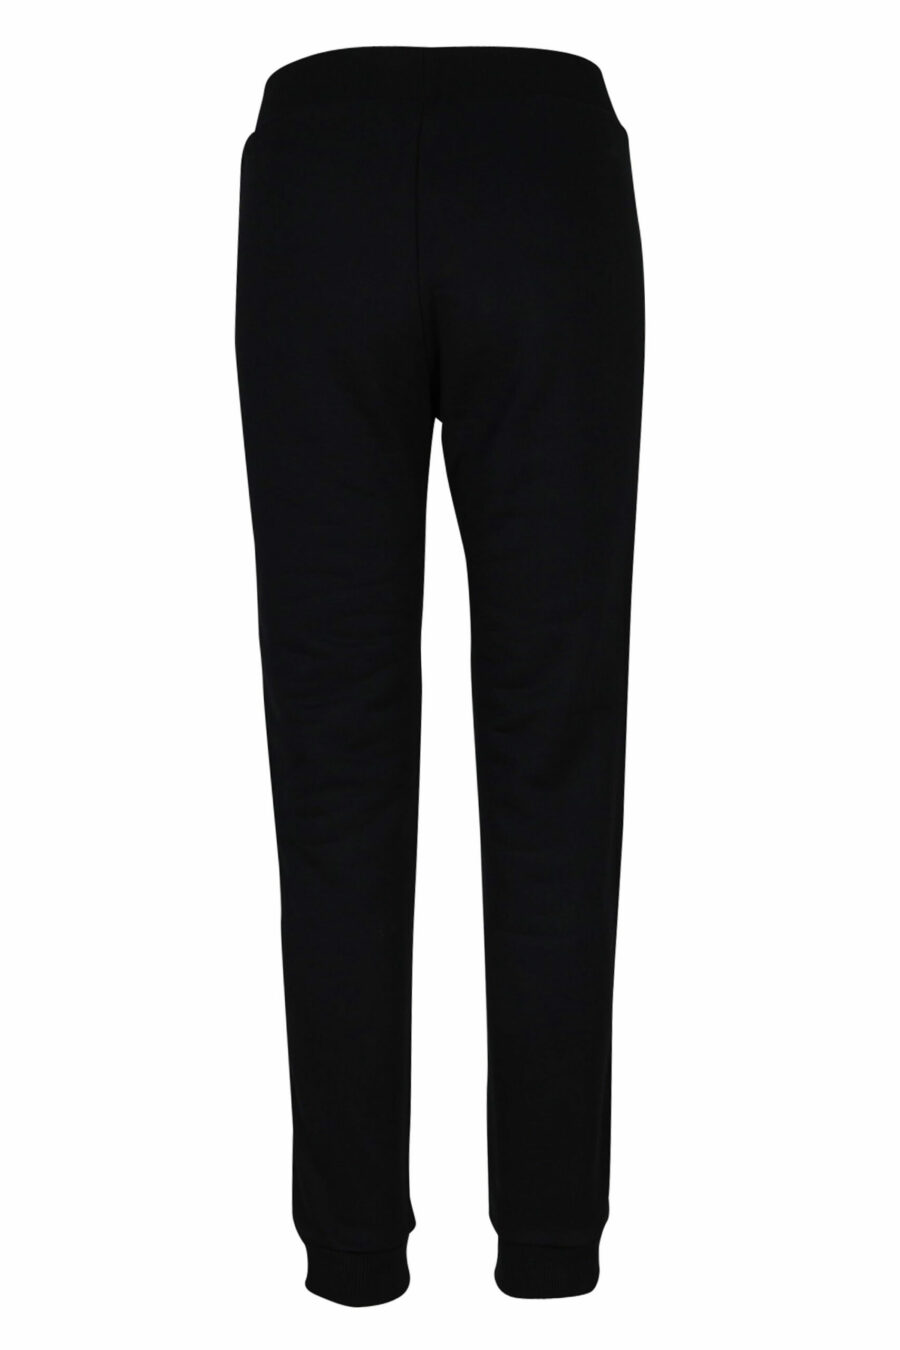 Tracksuit bottoms black with monochrome ribbon logo on sides - 889316614978 2 scaled